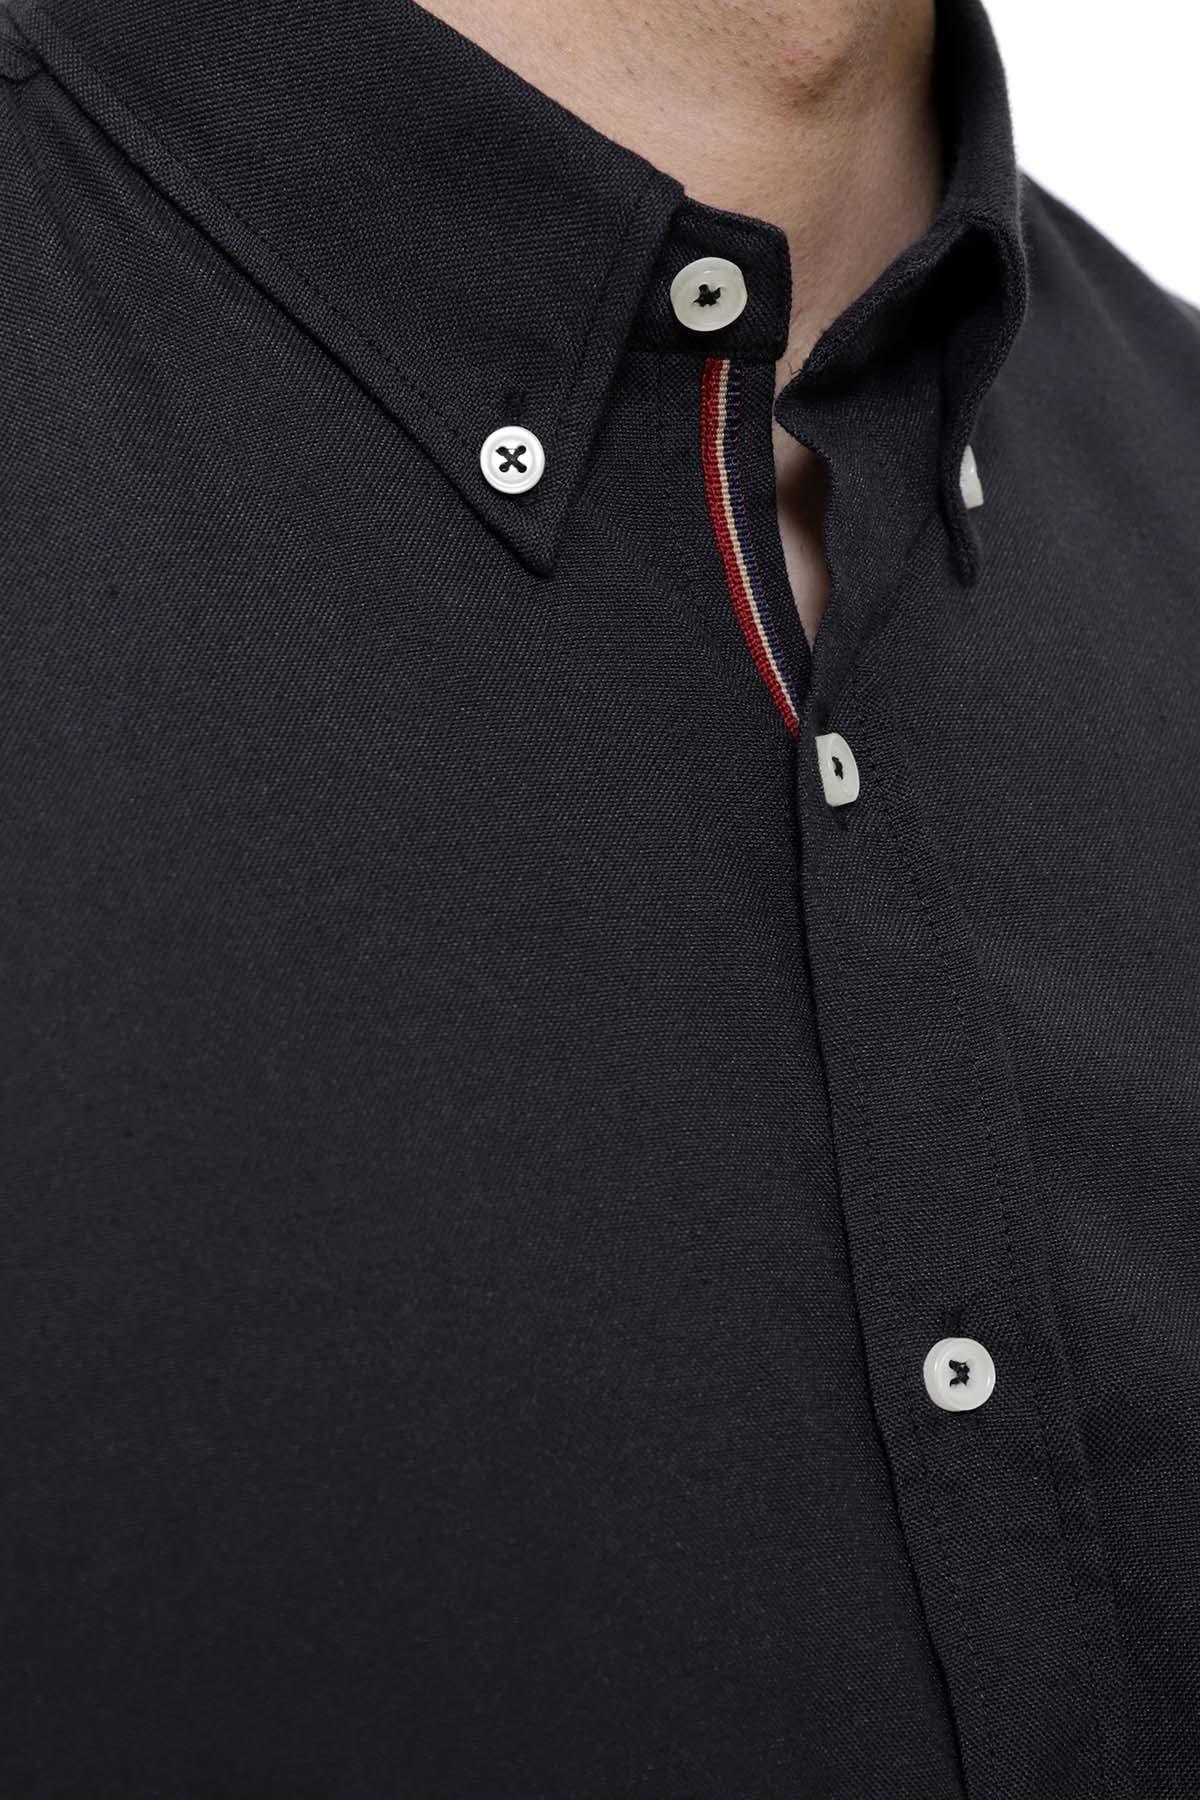 SMART SHIRT FULL SLEEVE BUTTON DOWN BLACK at Charcoal Clothing